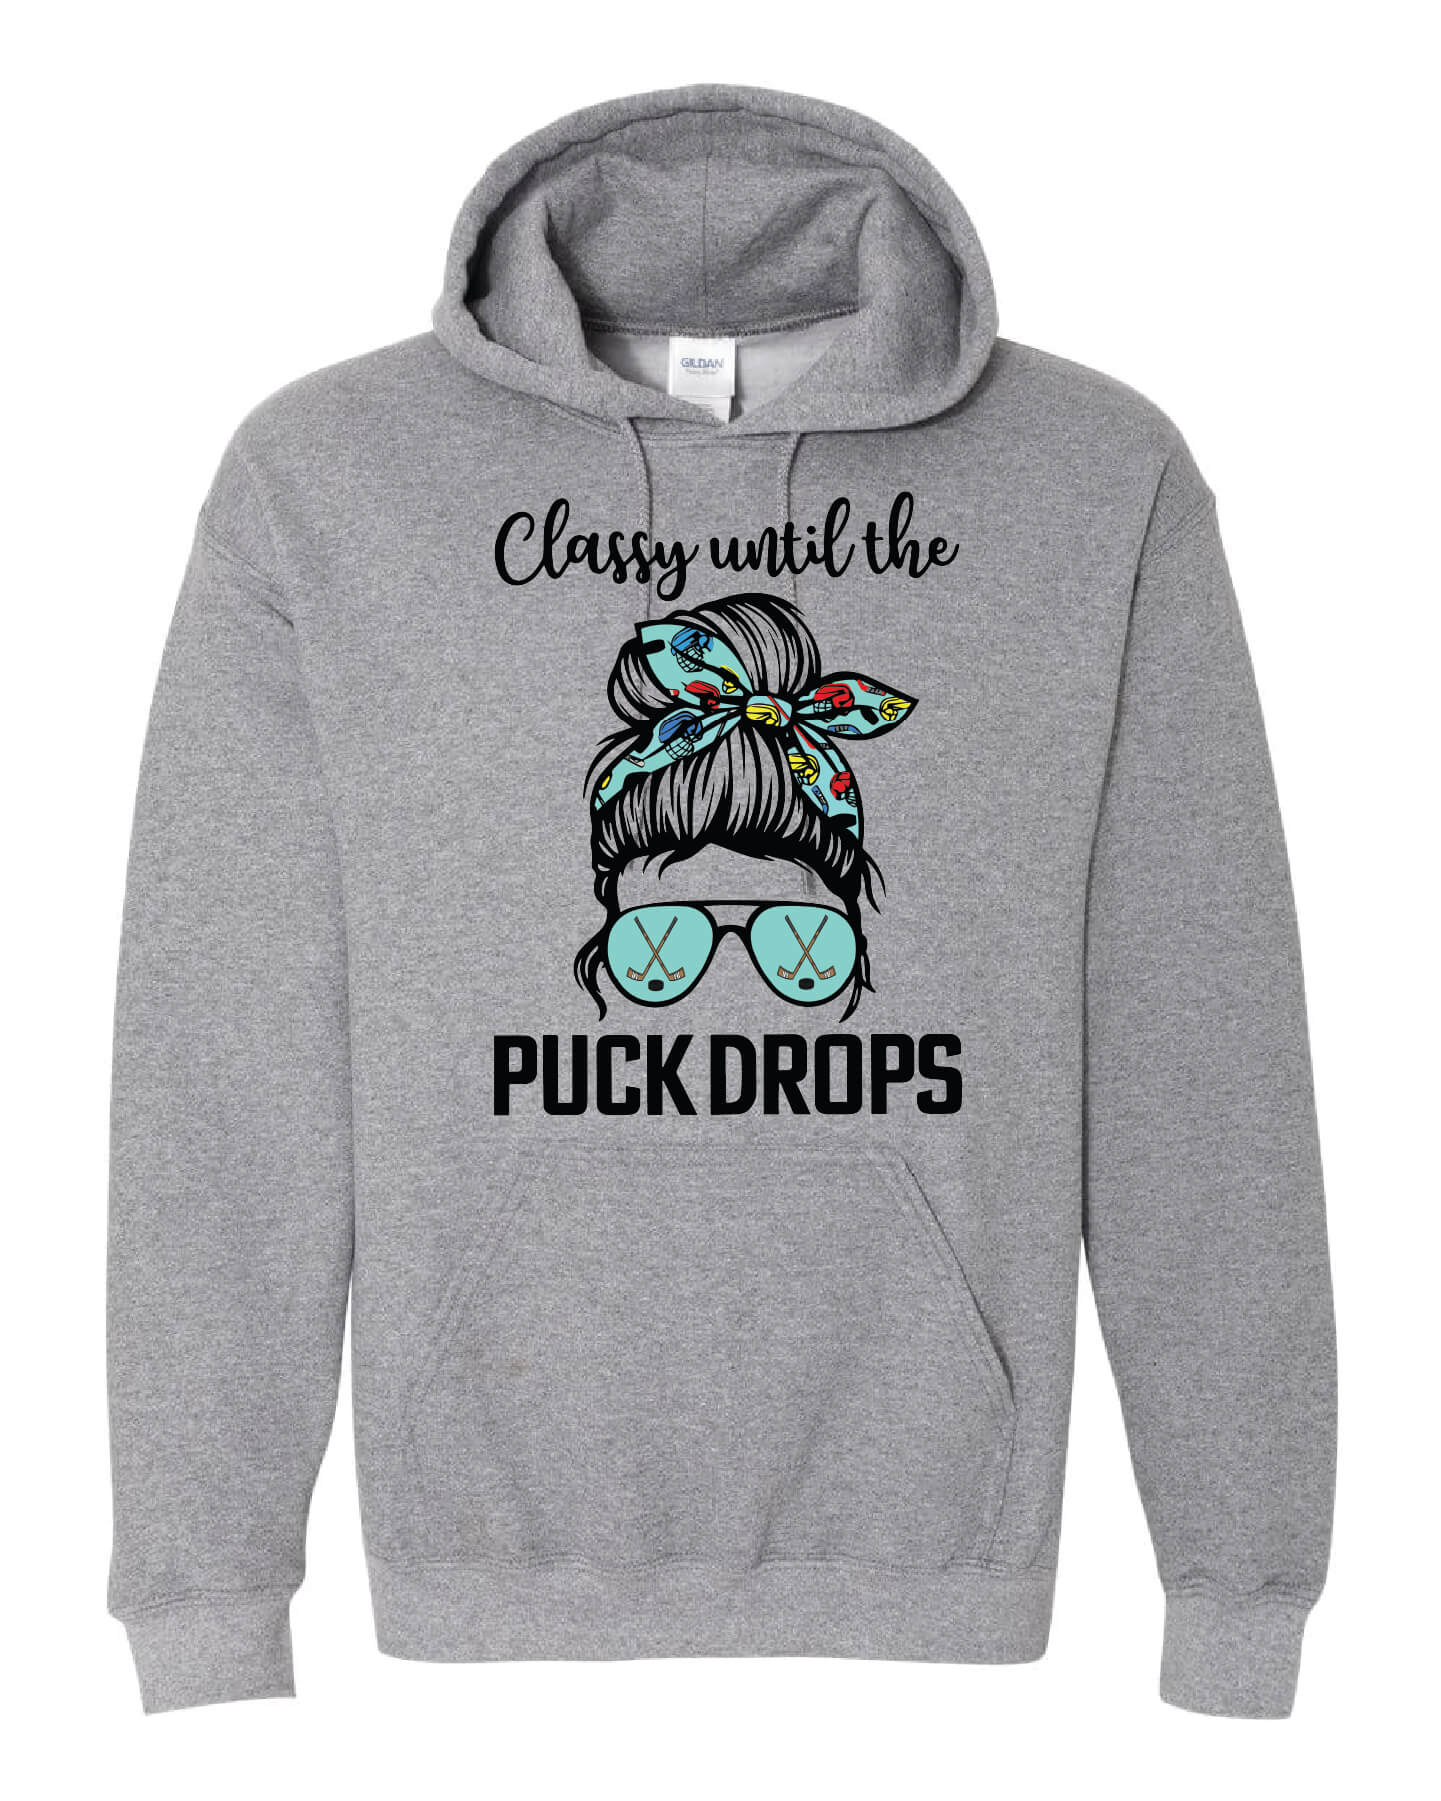 Classy Until The Puck Drops Hooded Sweatshirt - gray